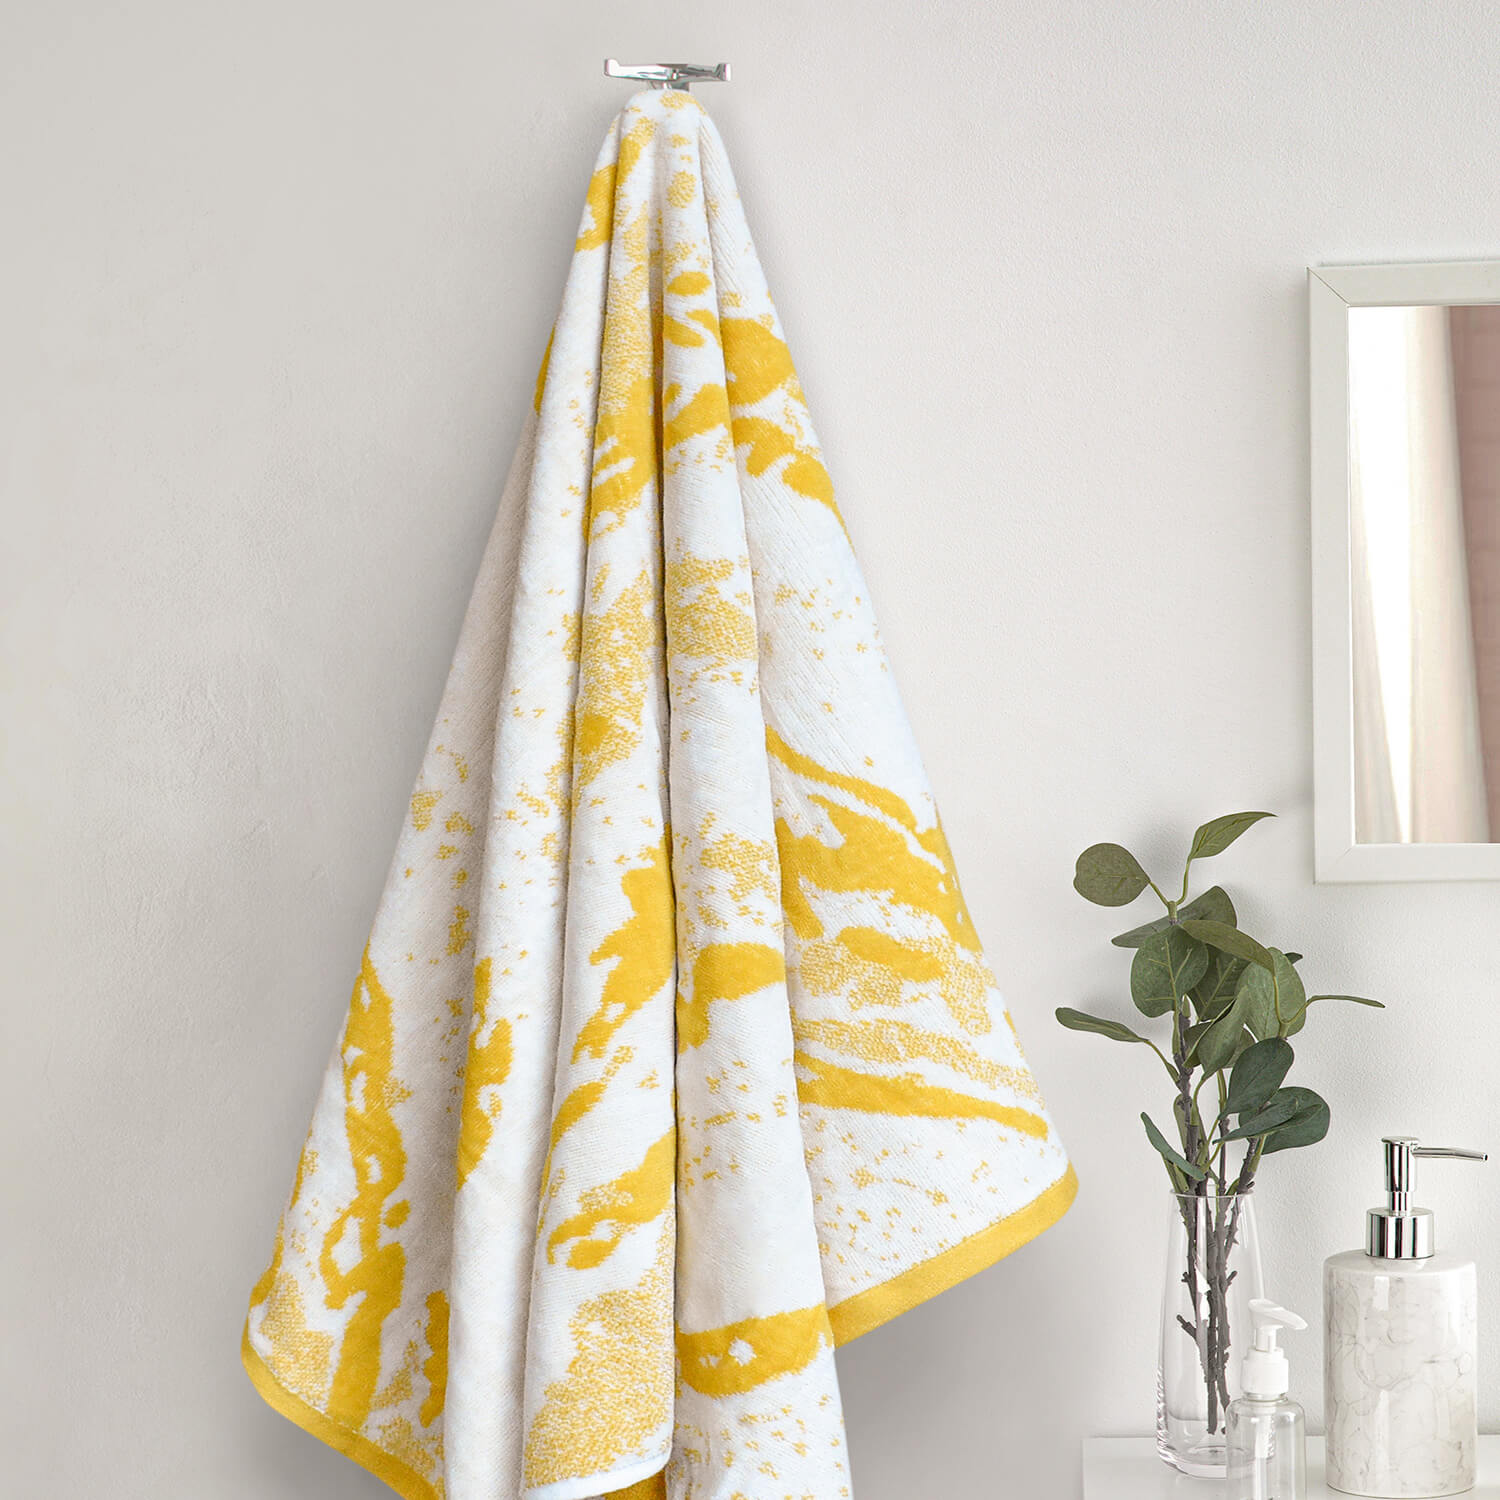 Velosso Marble Hand Towel - Gold 1 Shaws Department Stores